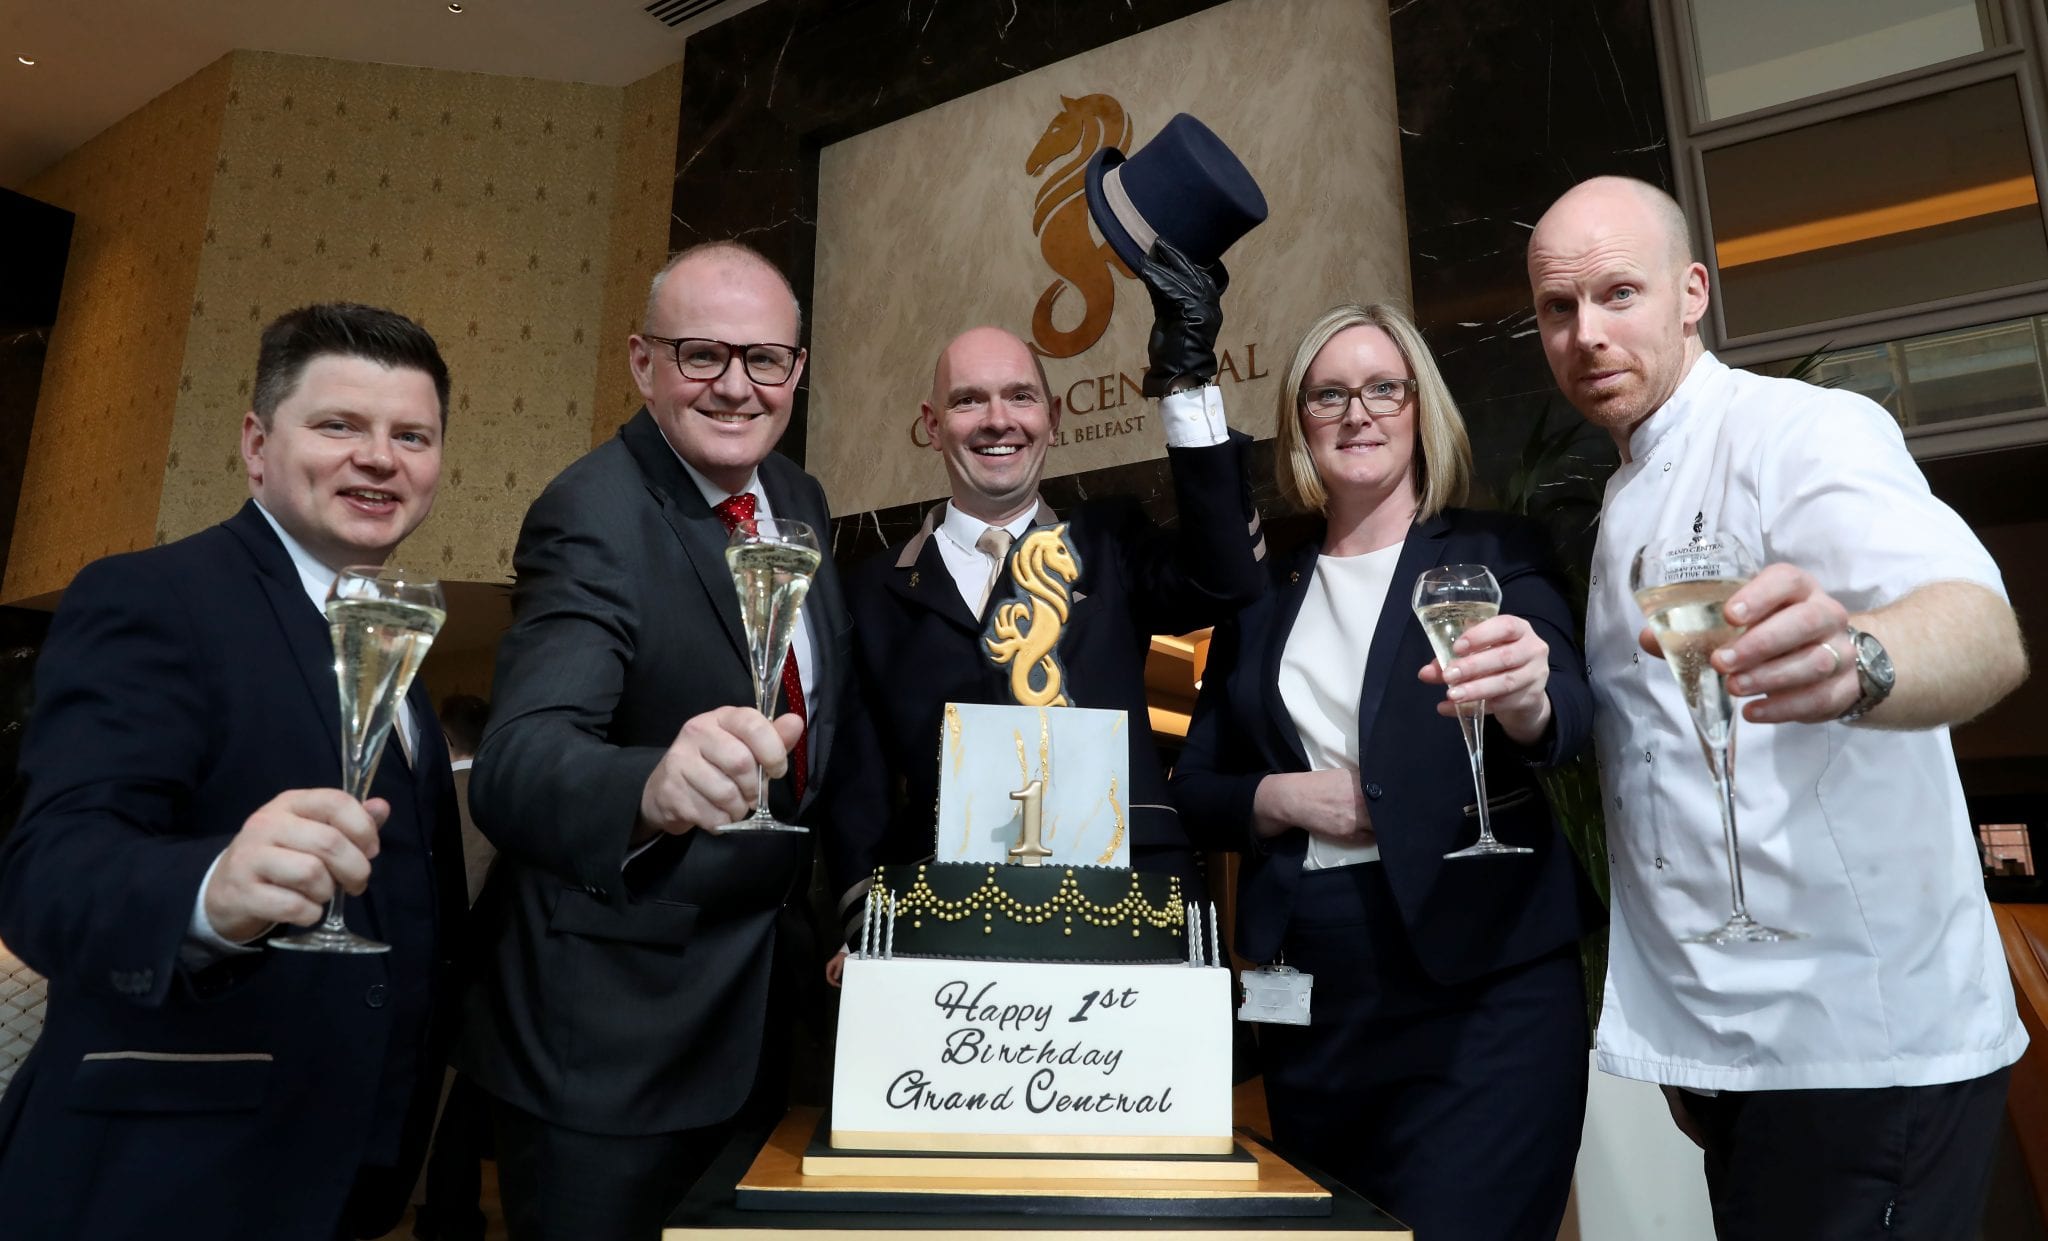 Grand Central Hotel celebrates first year of business